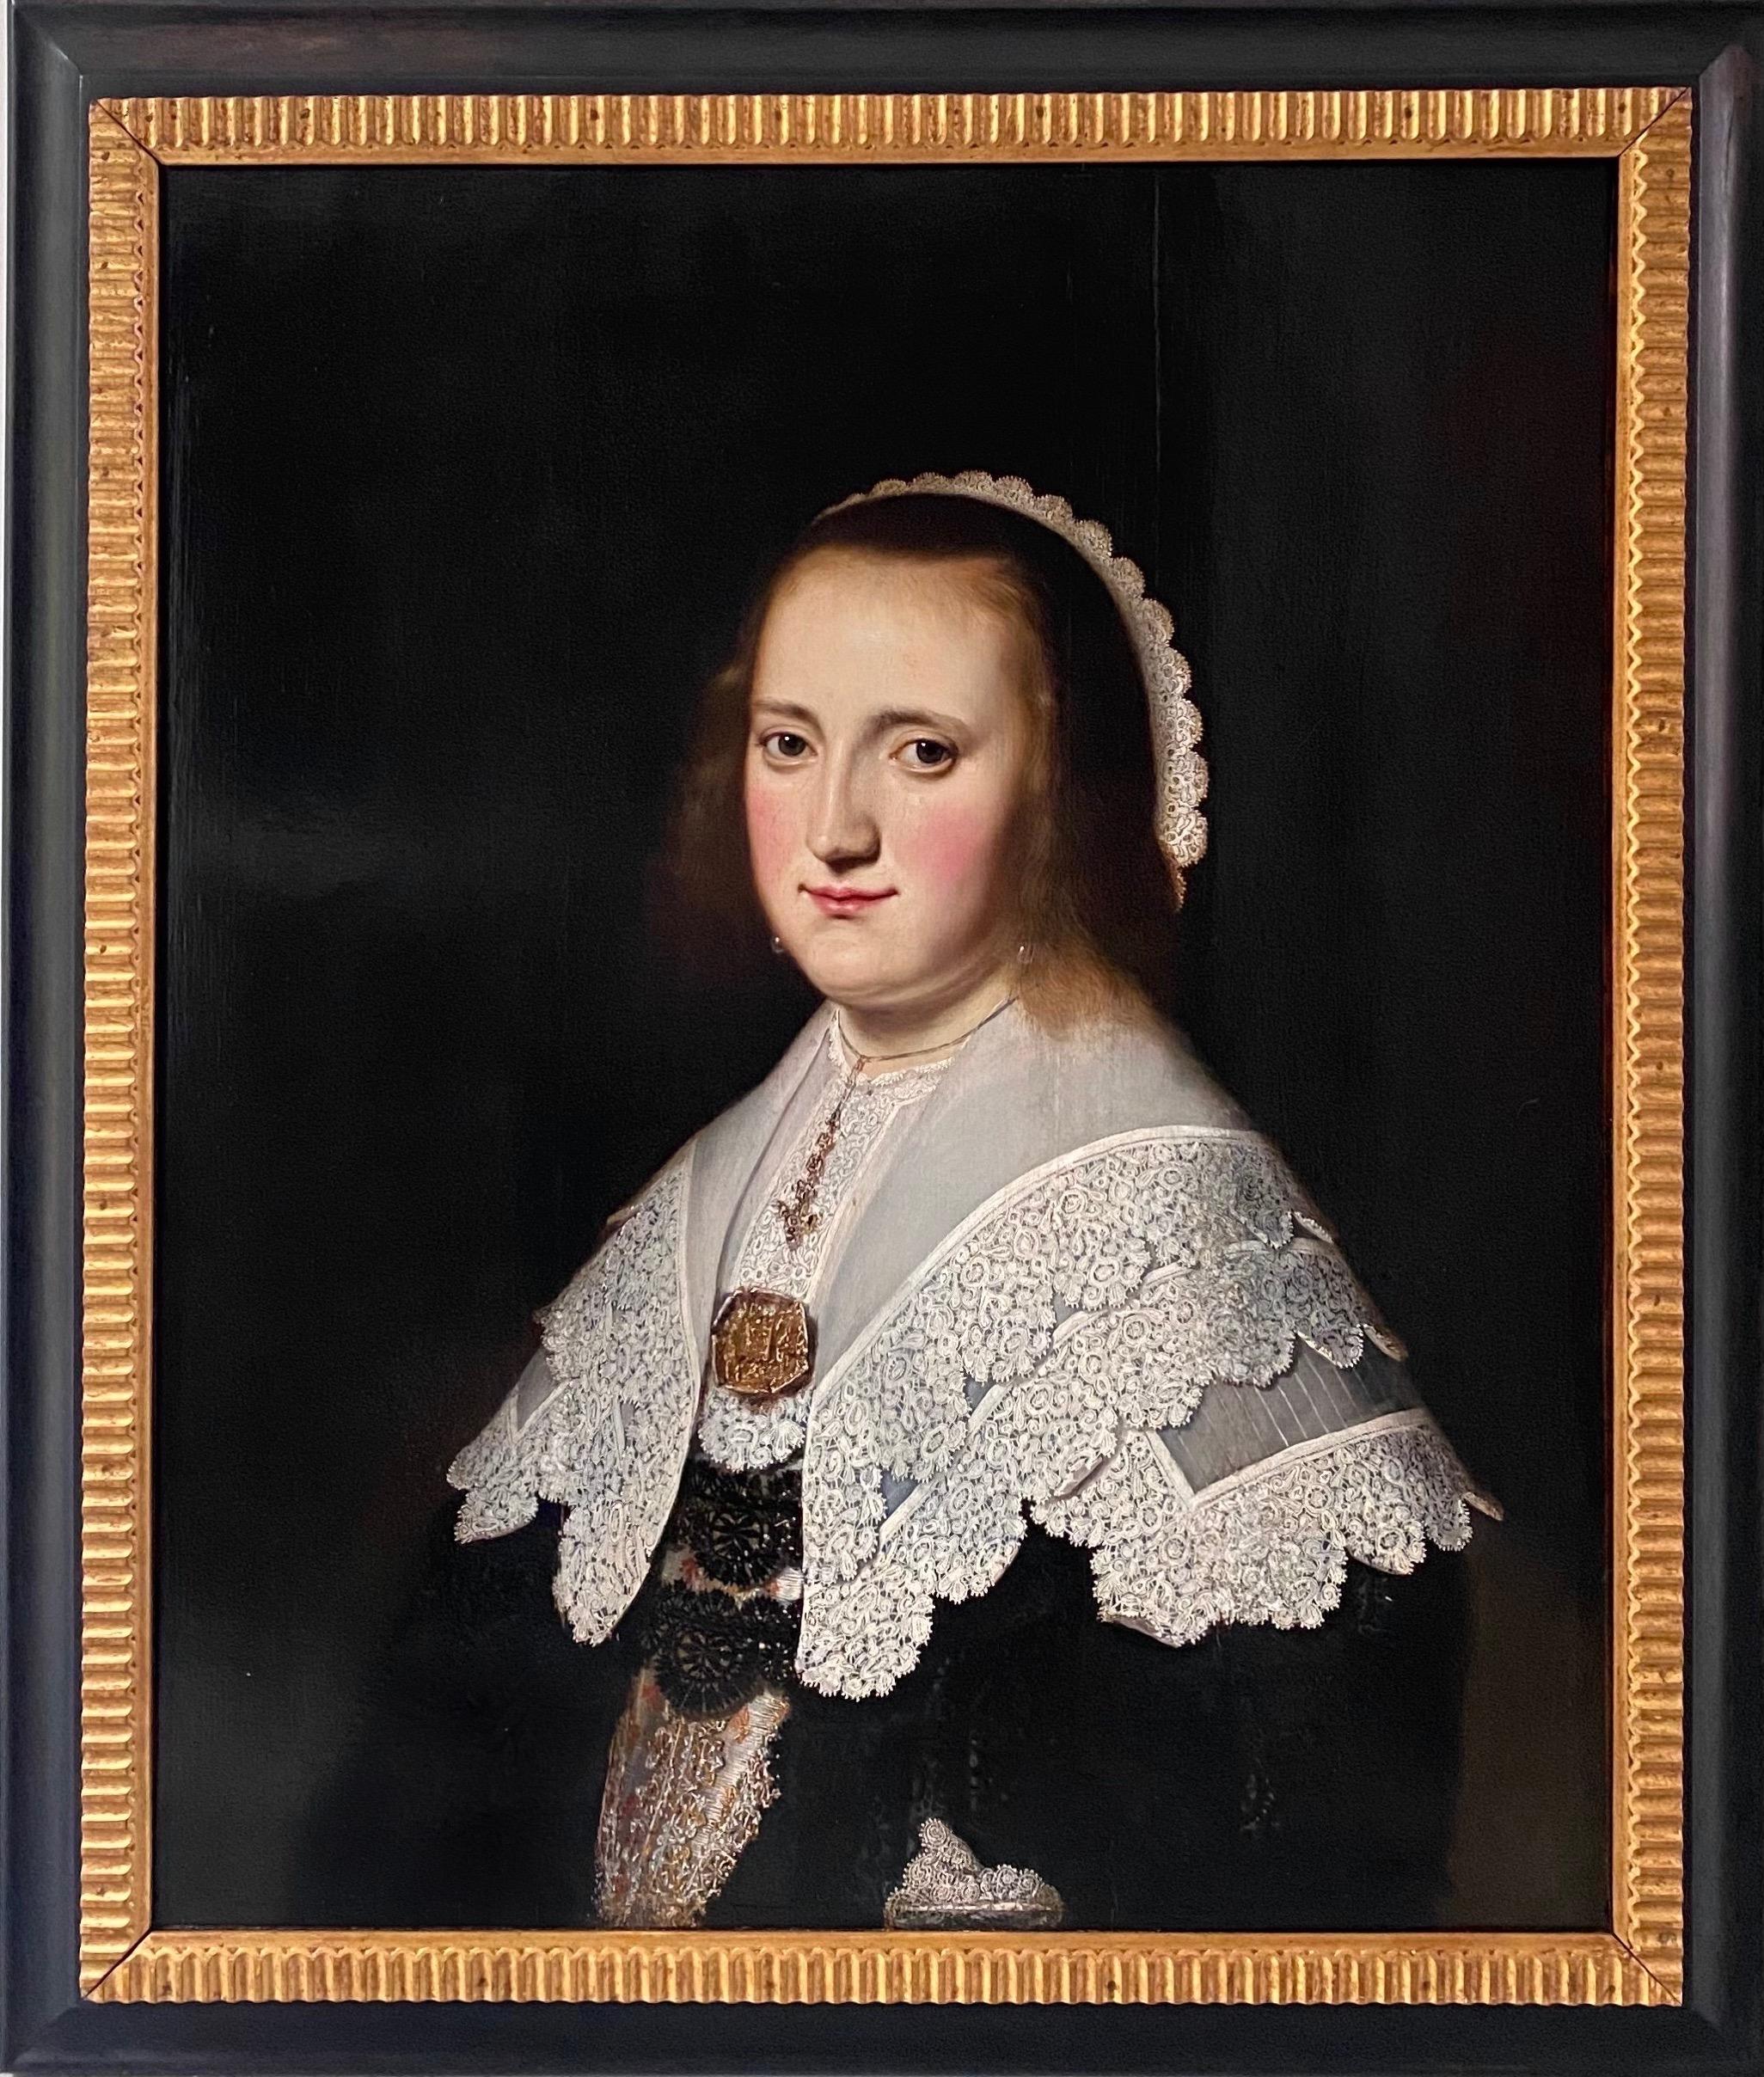 17th century Dutch Old Master Portait of a lady - lace collar jewellery